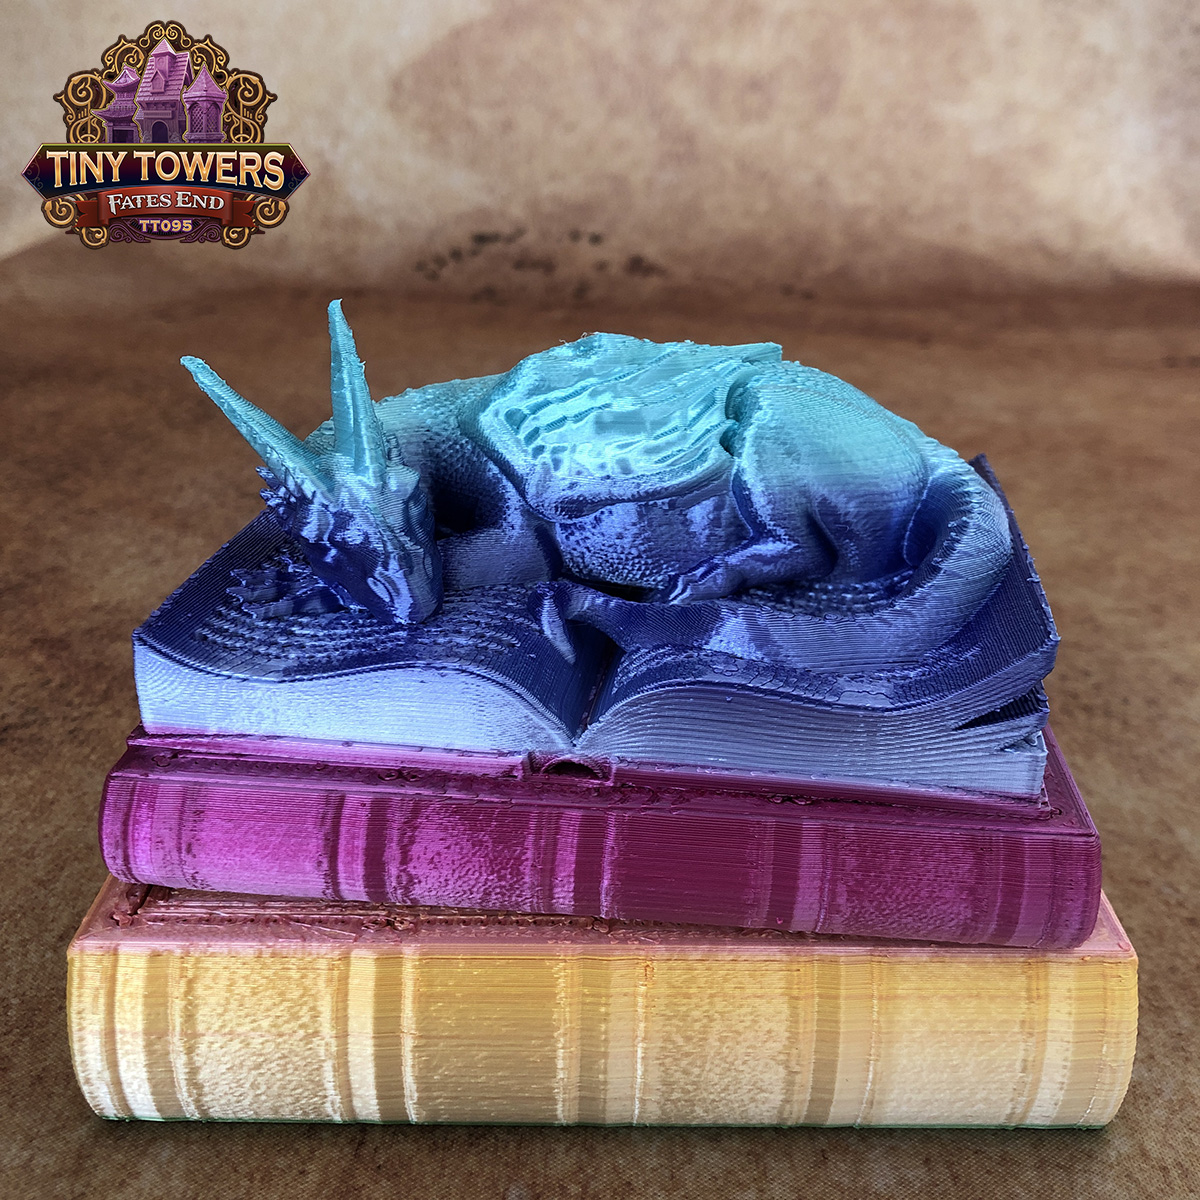 Tiny Towers BookDragon Dice Vault by
@FatesEndGames

From $15🇨🇦 ships to 🇨🇦 & 🇺🇸

links in bio @BrentsWorkbench

#3dprinted #fatesend #tinytowers #bookdragon #dicevault #dice #rpg #ttrpg #dnd #dungeonsanddragons #tabletoprpg #tabletopgaming #wargaming #warhammer #dungeonmaster